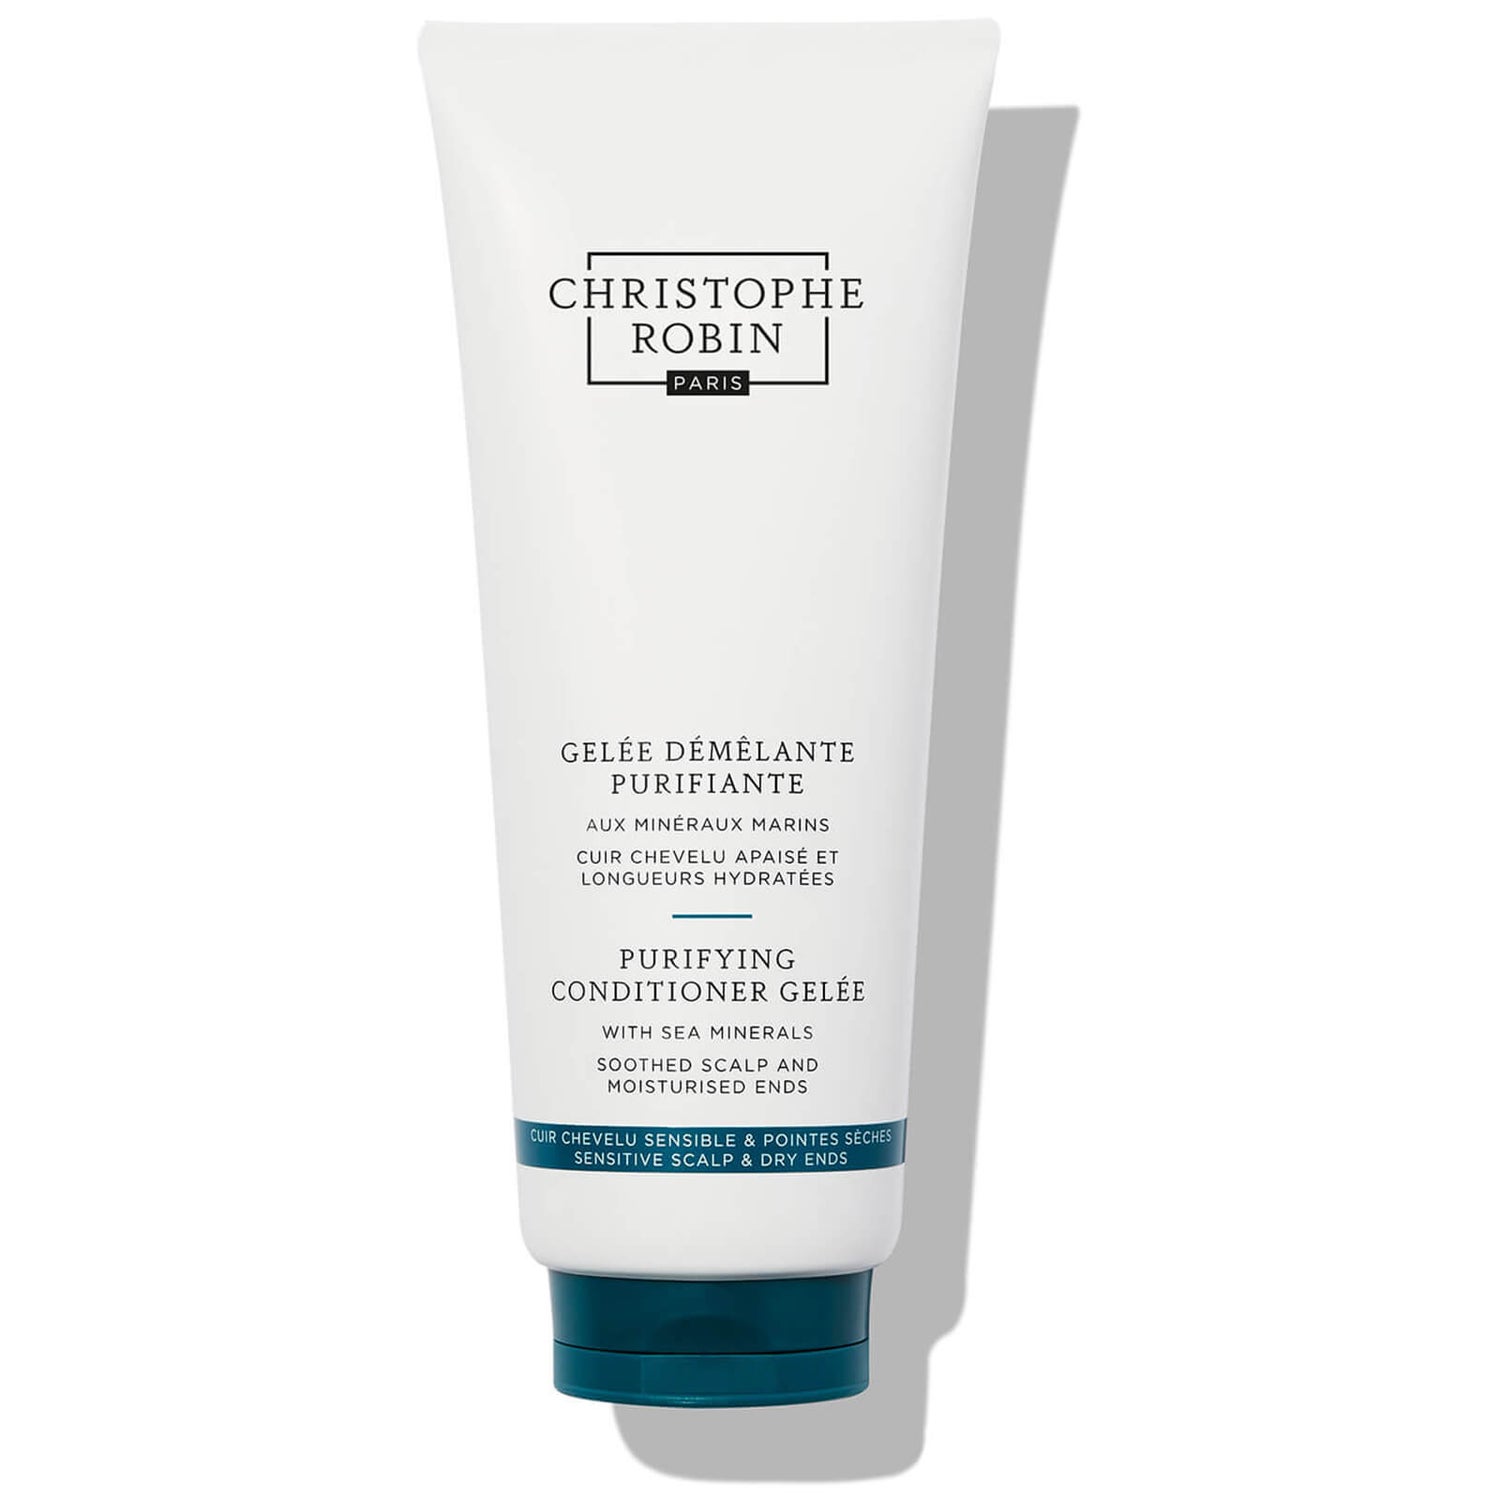 Christophe Robin Purifying Conditioner Gelée with Sea Minerals 200ml